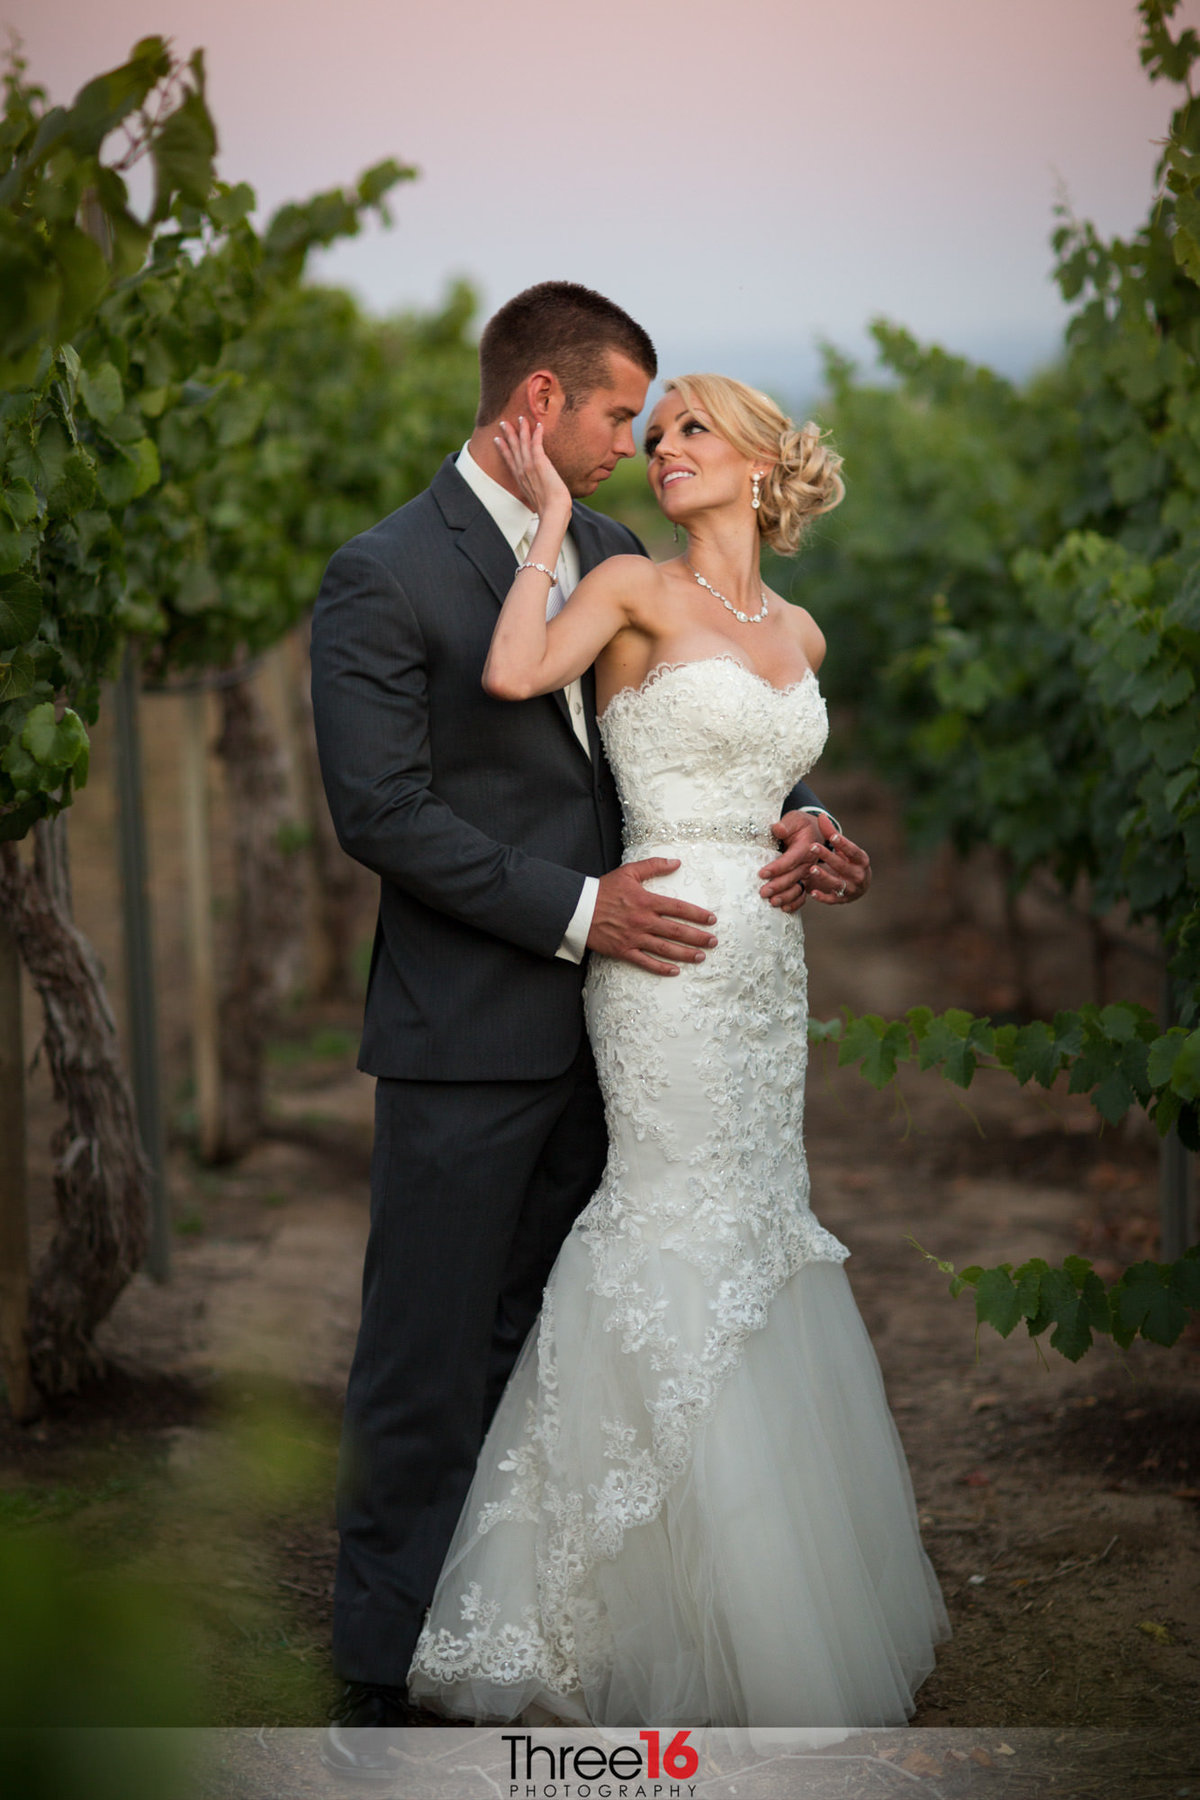 Bride looks back at her Groom as they gaze into each other's eyes while standing in a winery orchard